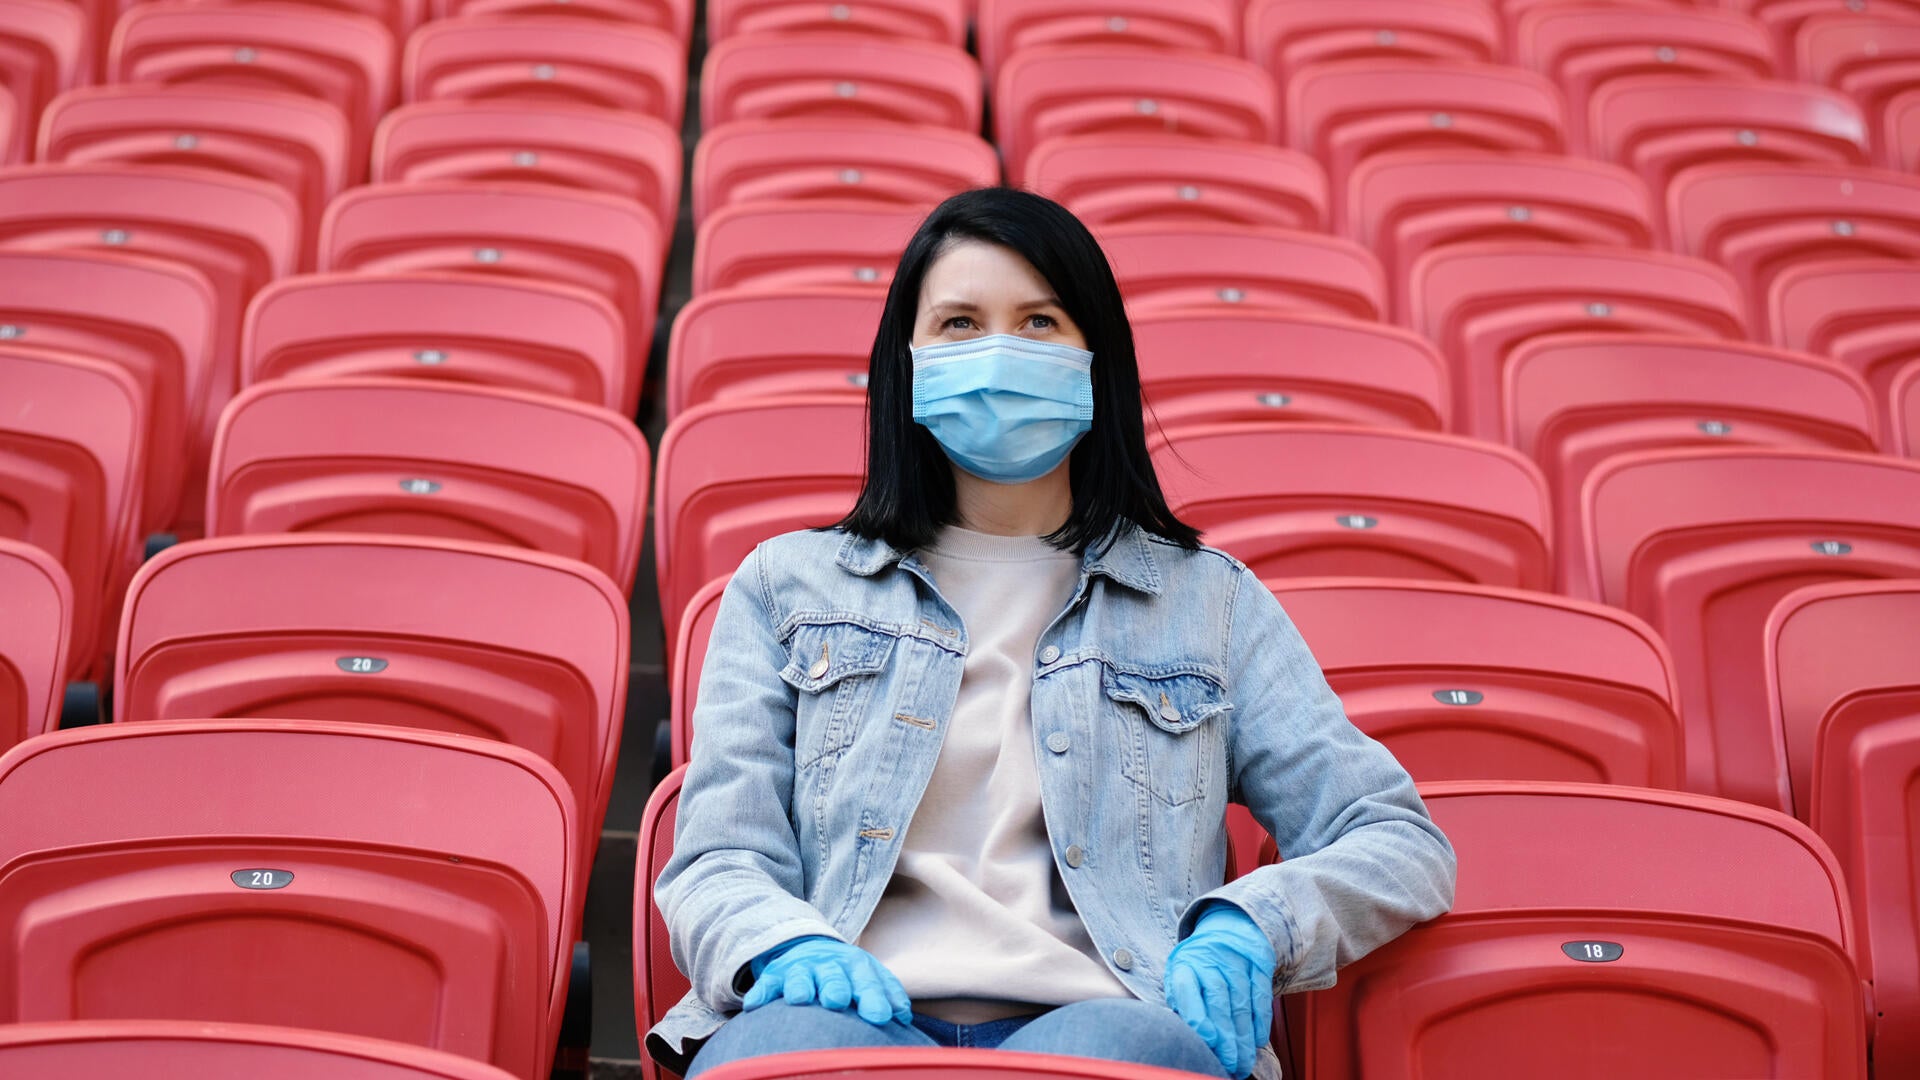 woman with dark hair wearing a mask sitting in an empty stadium